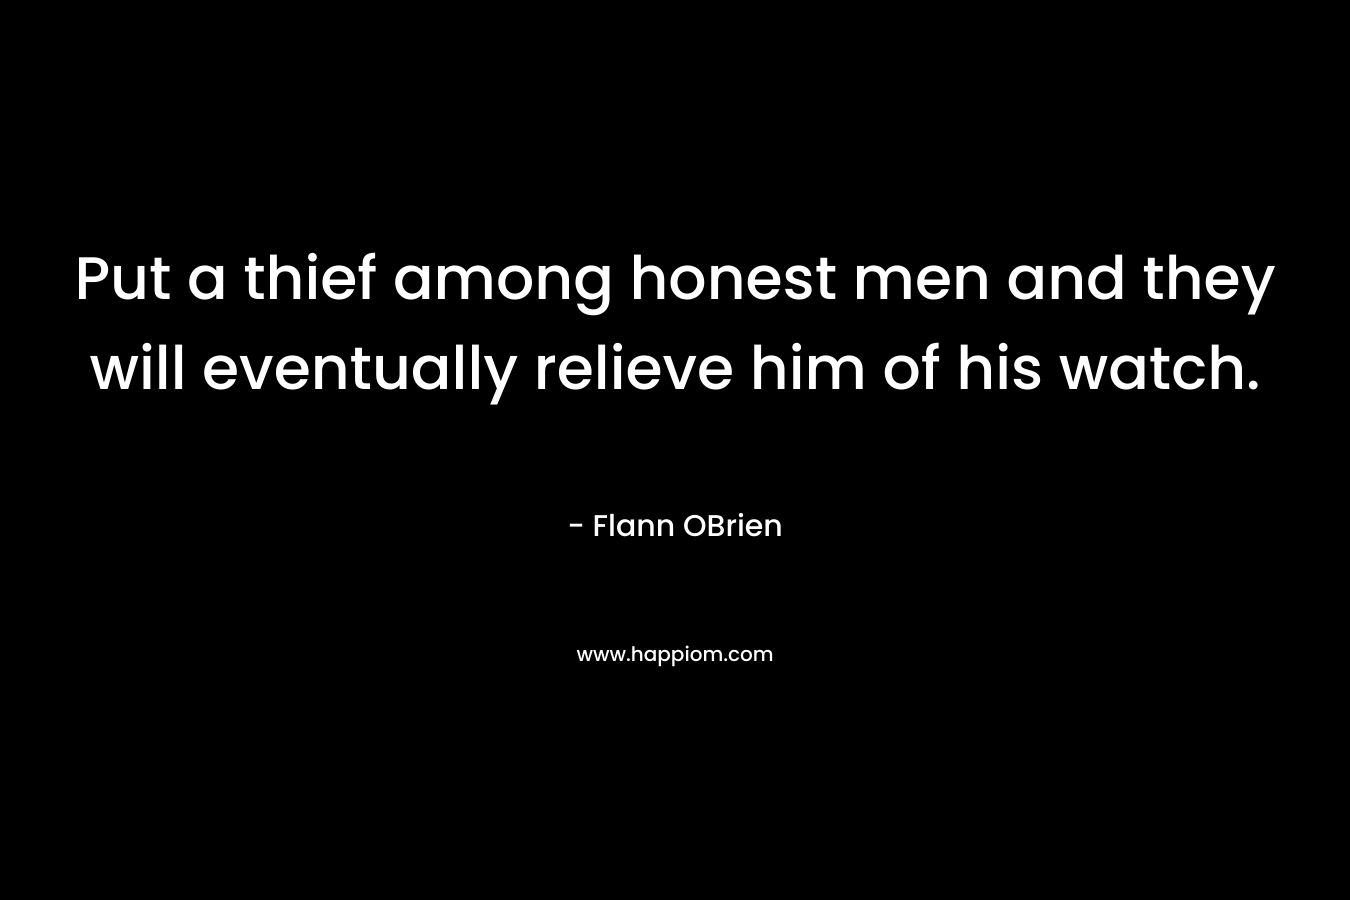 Put a thief among honest men and they will eventually relieve him of his watch.